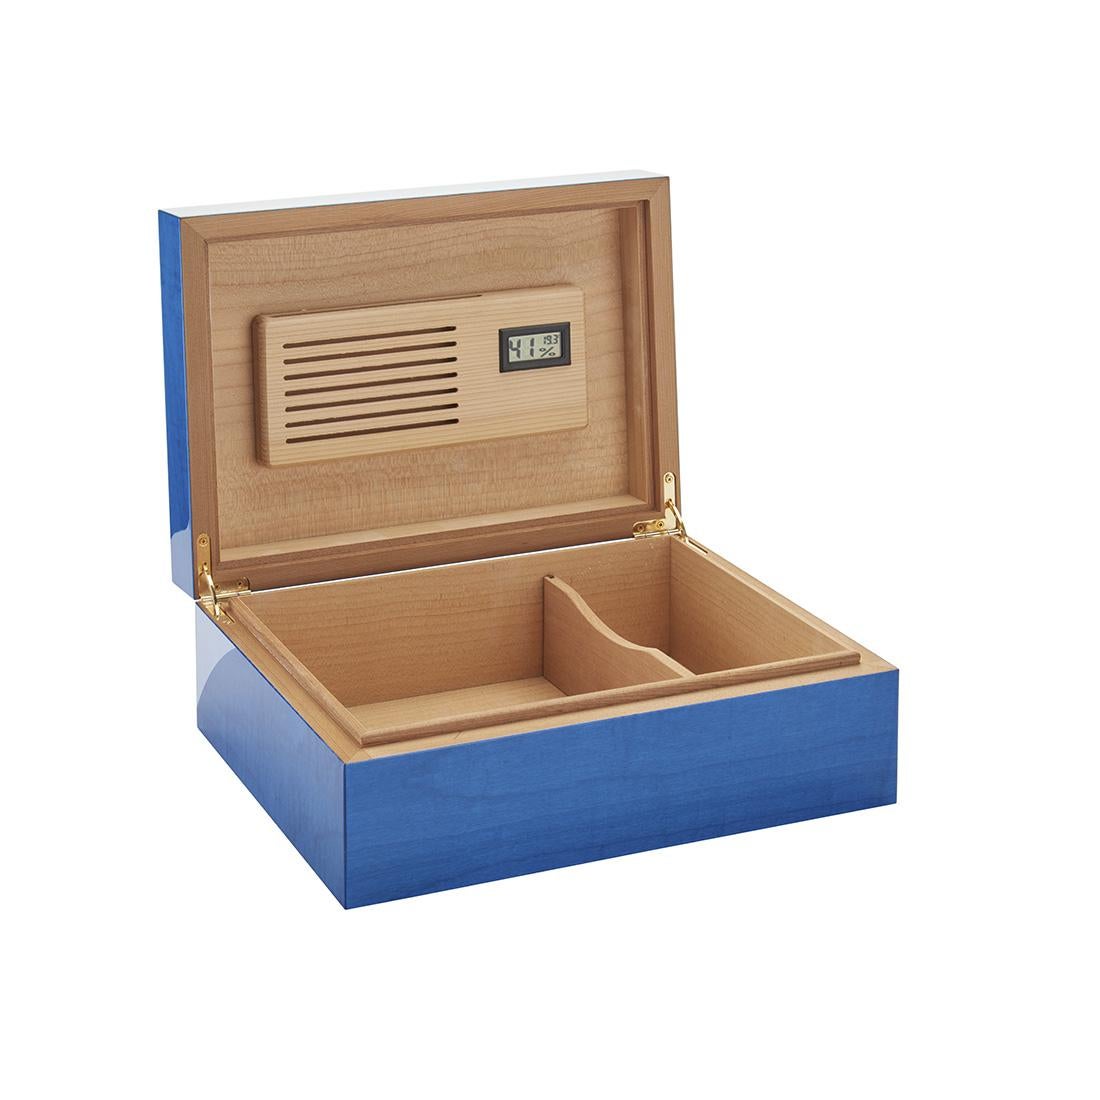 Painted in a delicate blue shade enhancing its stunning natural grains, polished and brushed by hand with polyester for a luminous mirrored finish, this cigar box is a sublime display of artisanal craftsmanship. Handmade of cedar wood, enriched with